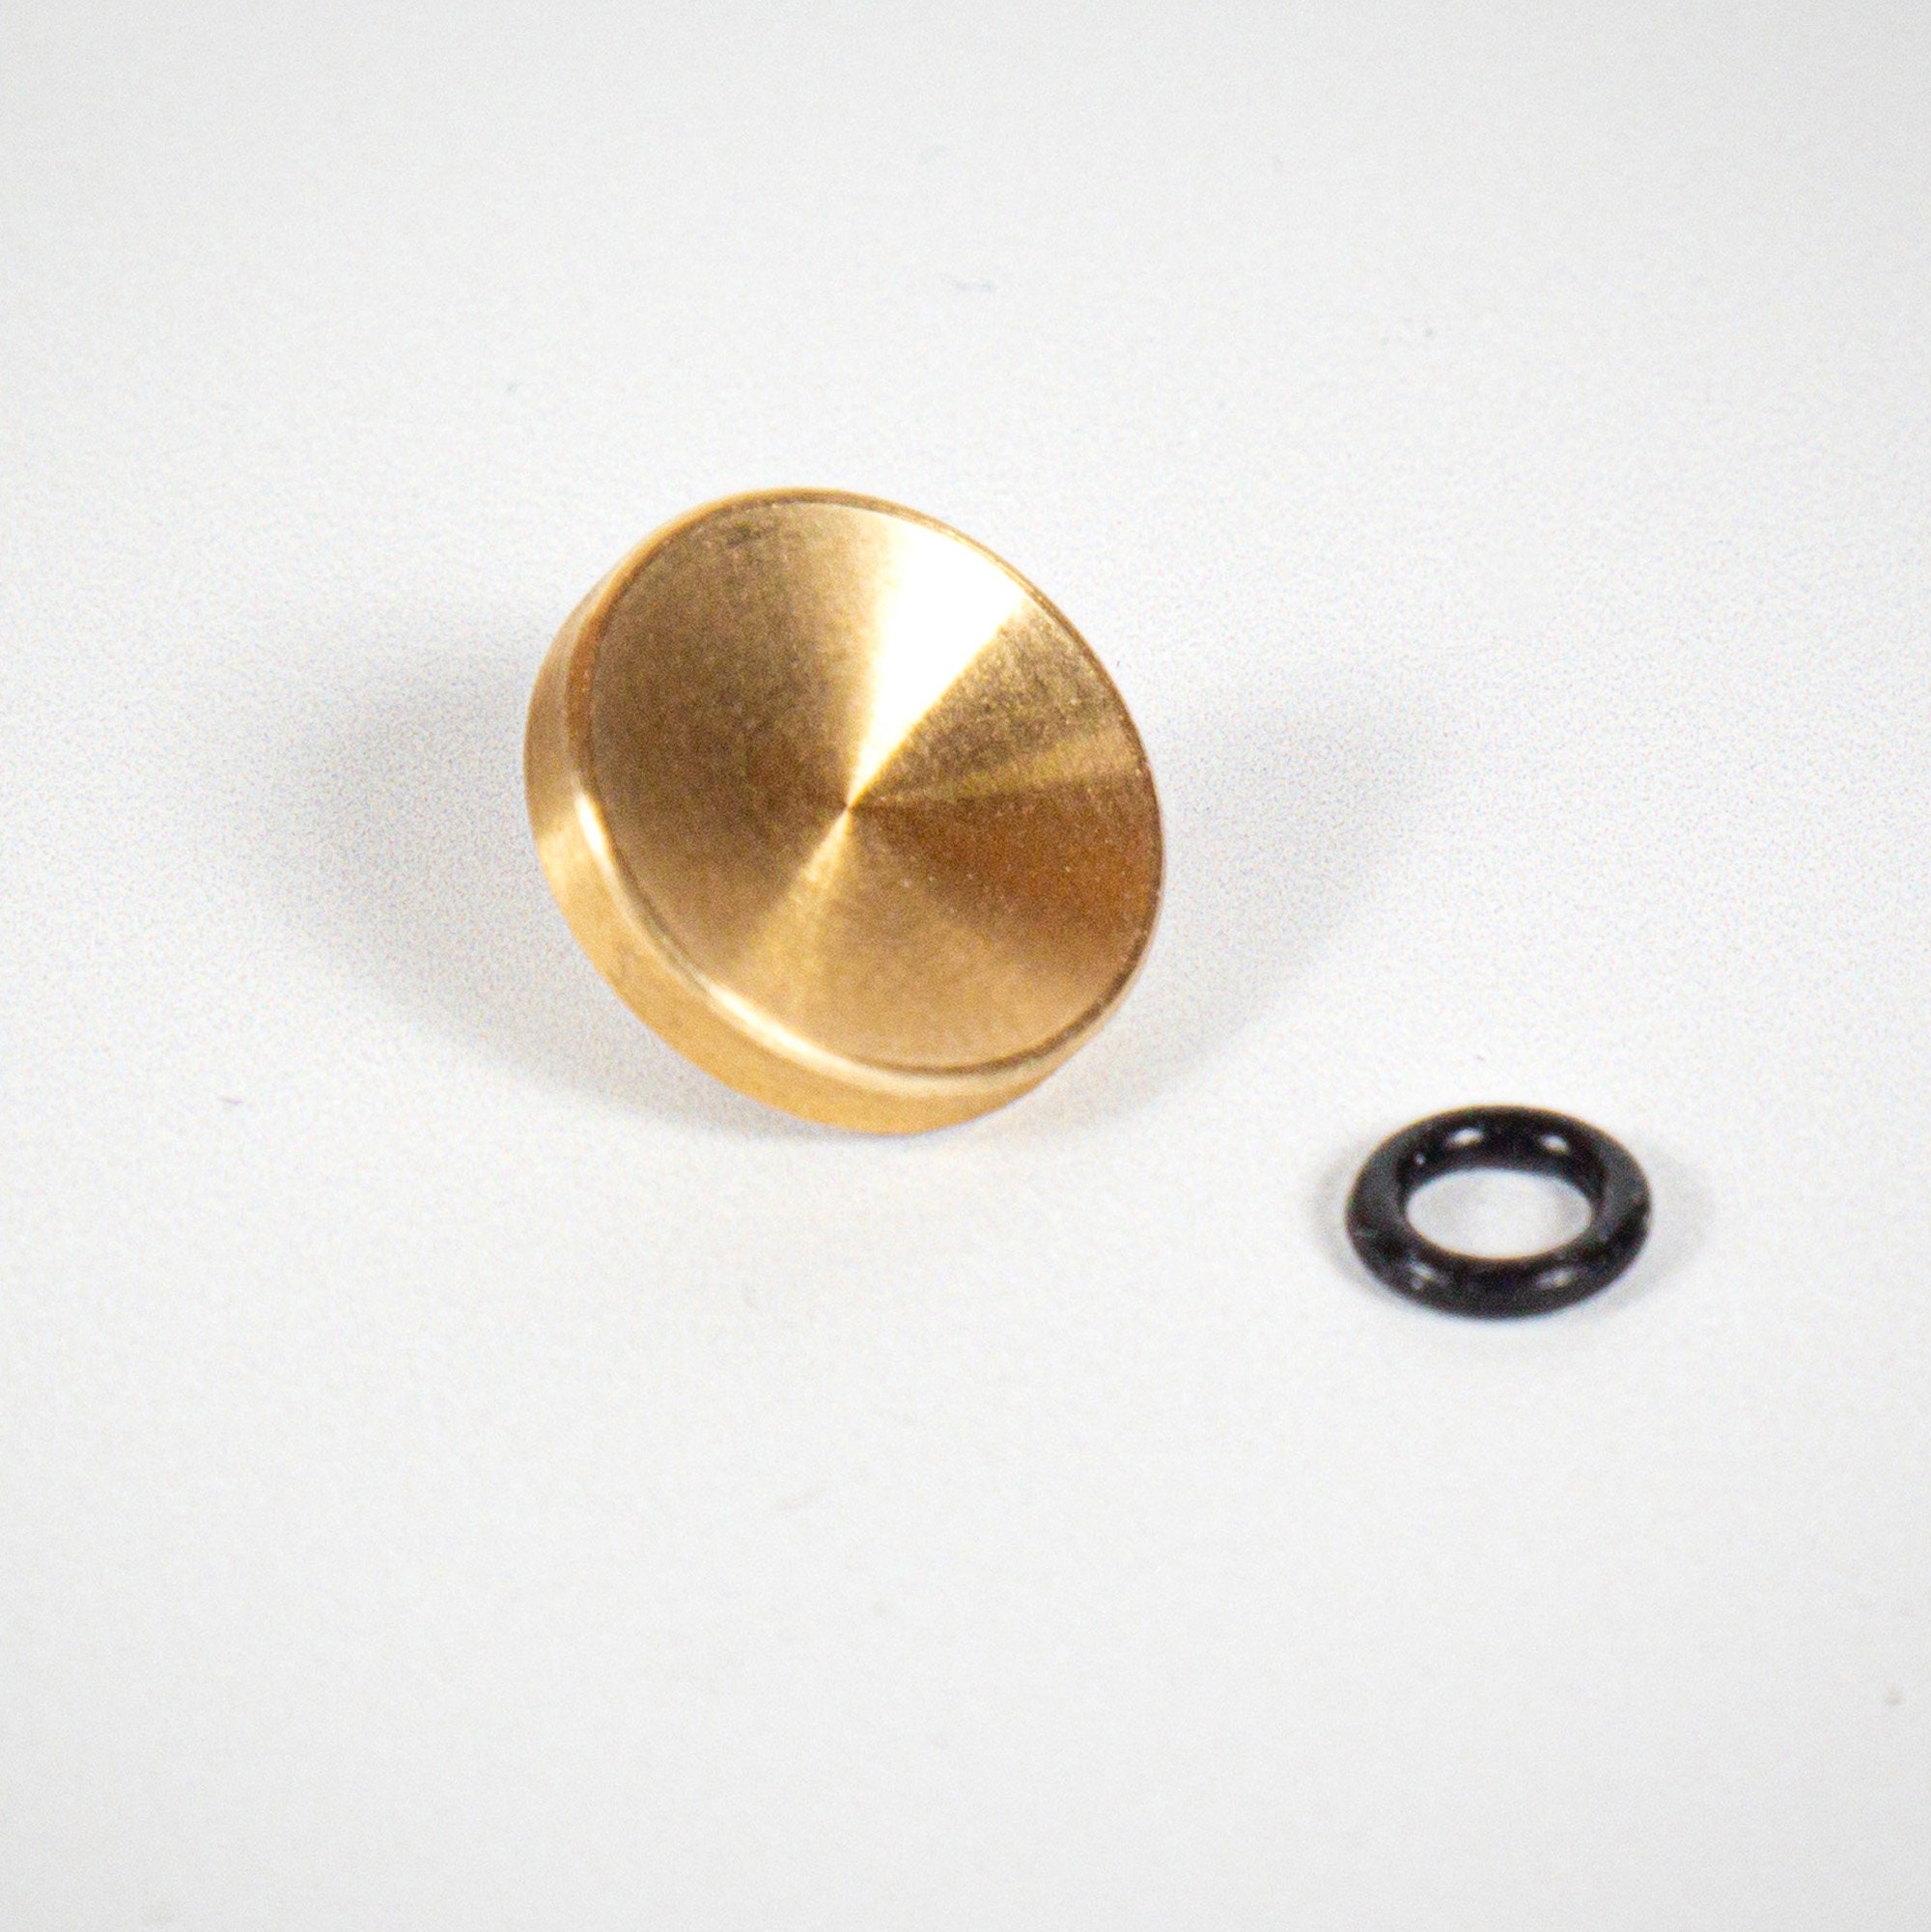 Solid Brass Soft Shutter Release Button for 35mm Film Cameras Perfect Fit  for Fuji X100V / Leica M / Canon/ Nikon -  Finland